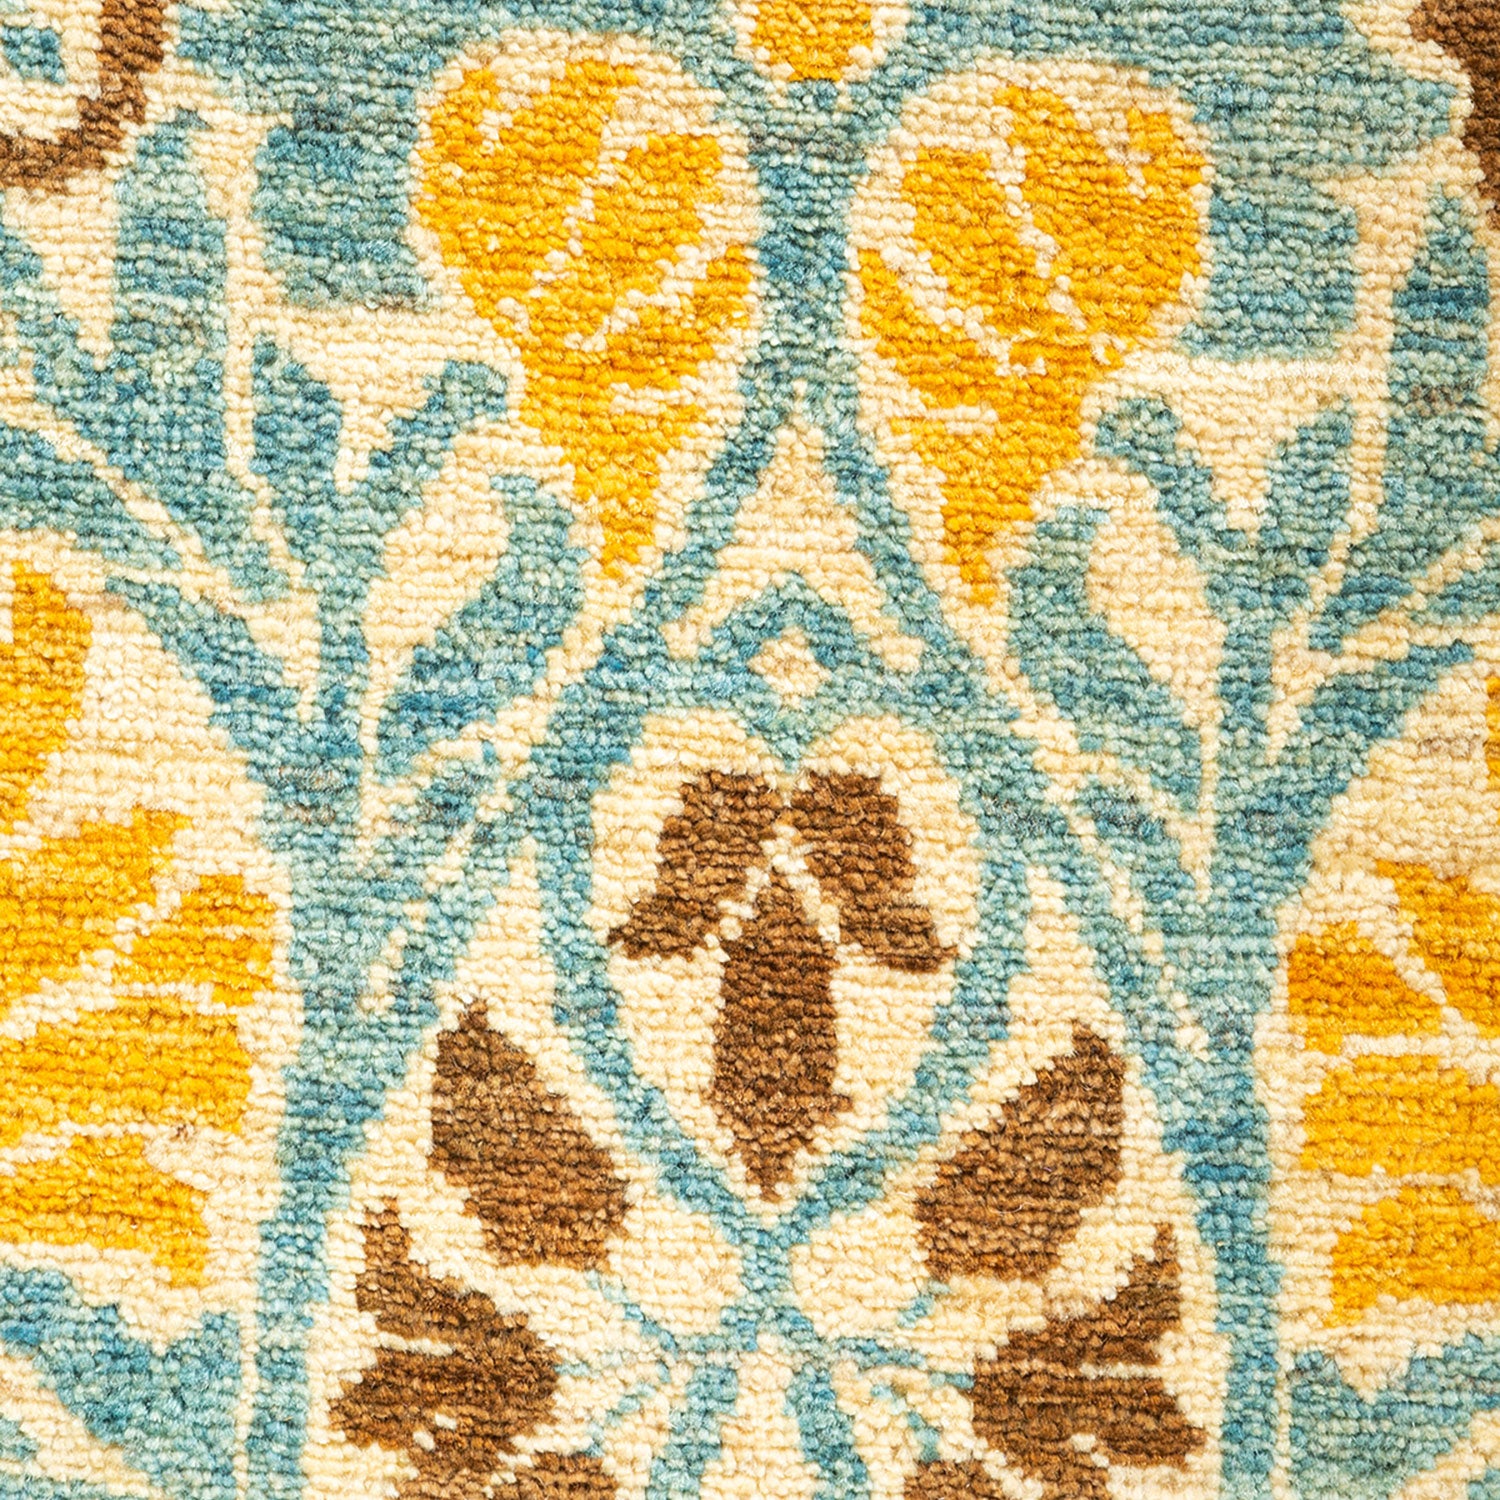 Close-up of a textured, ornamental carpet with intricate floral pattern